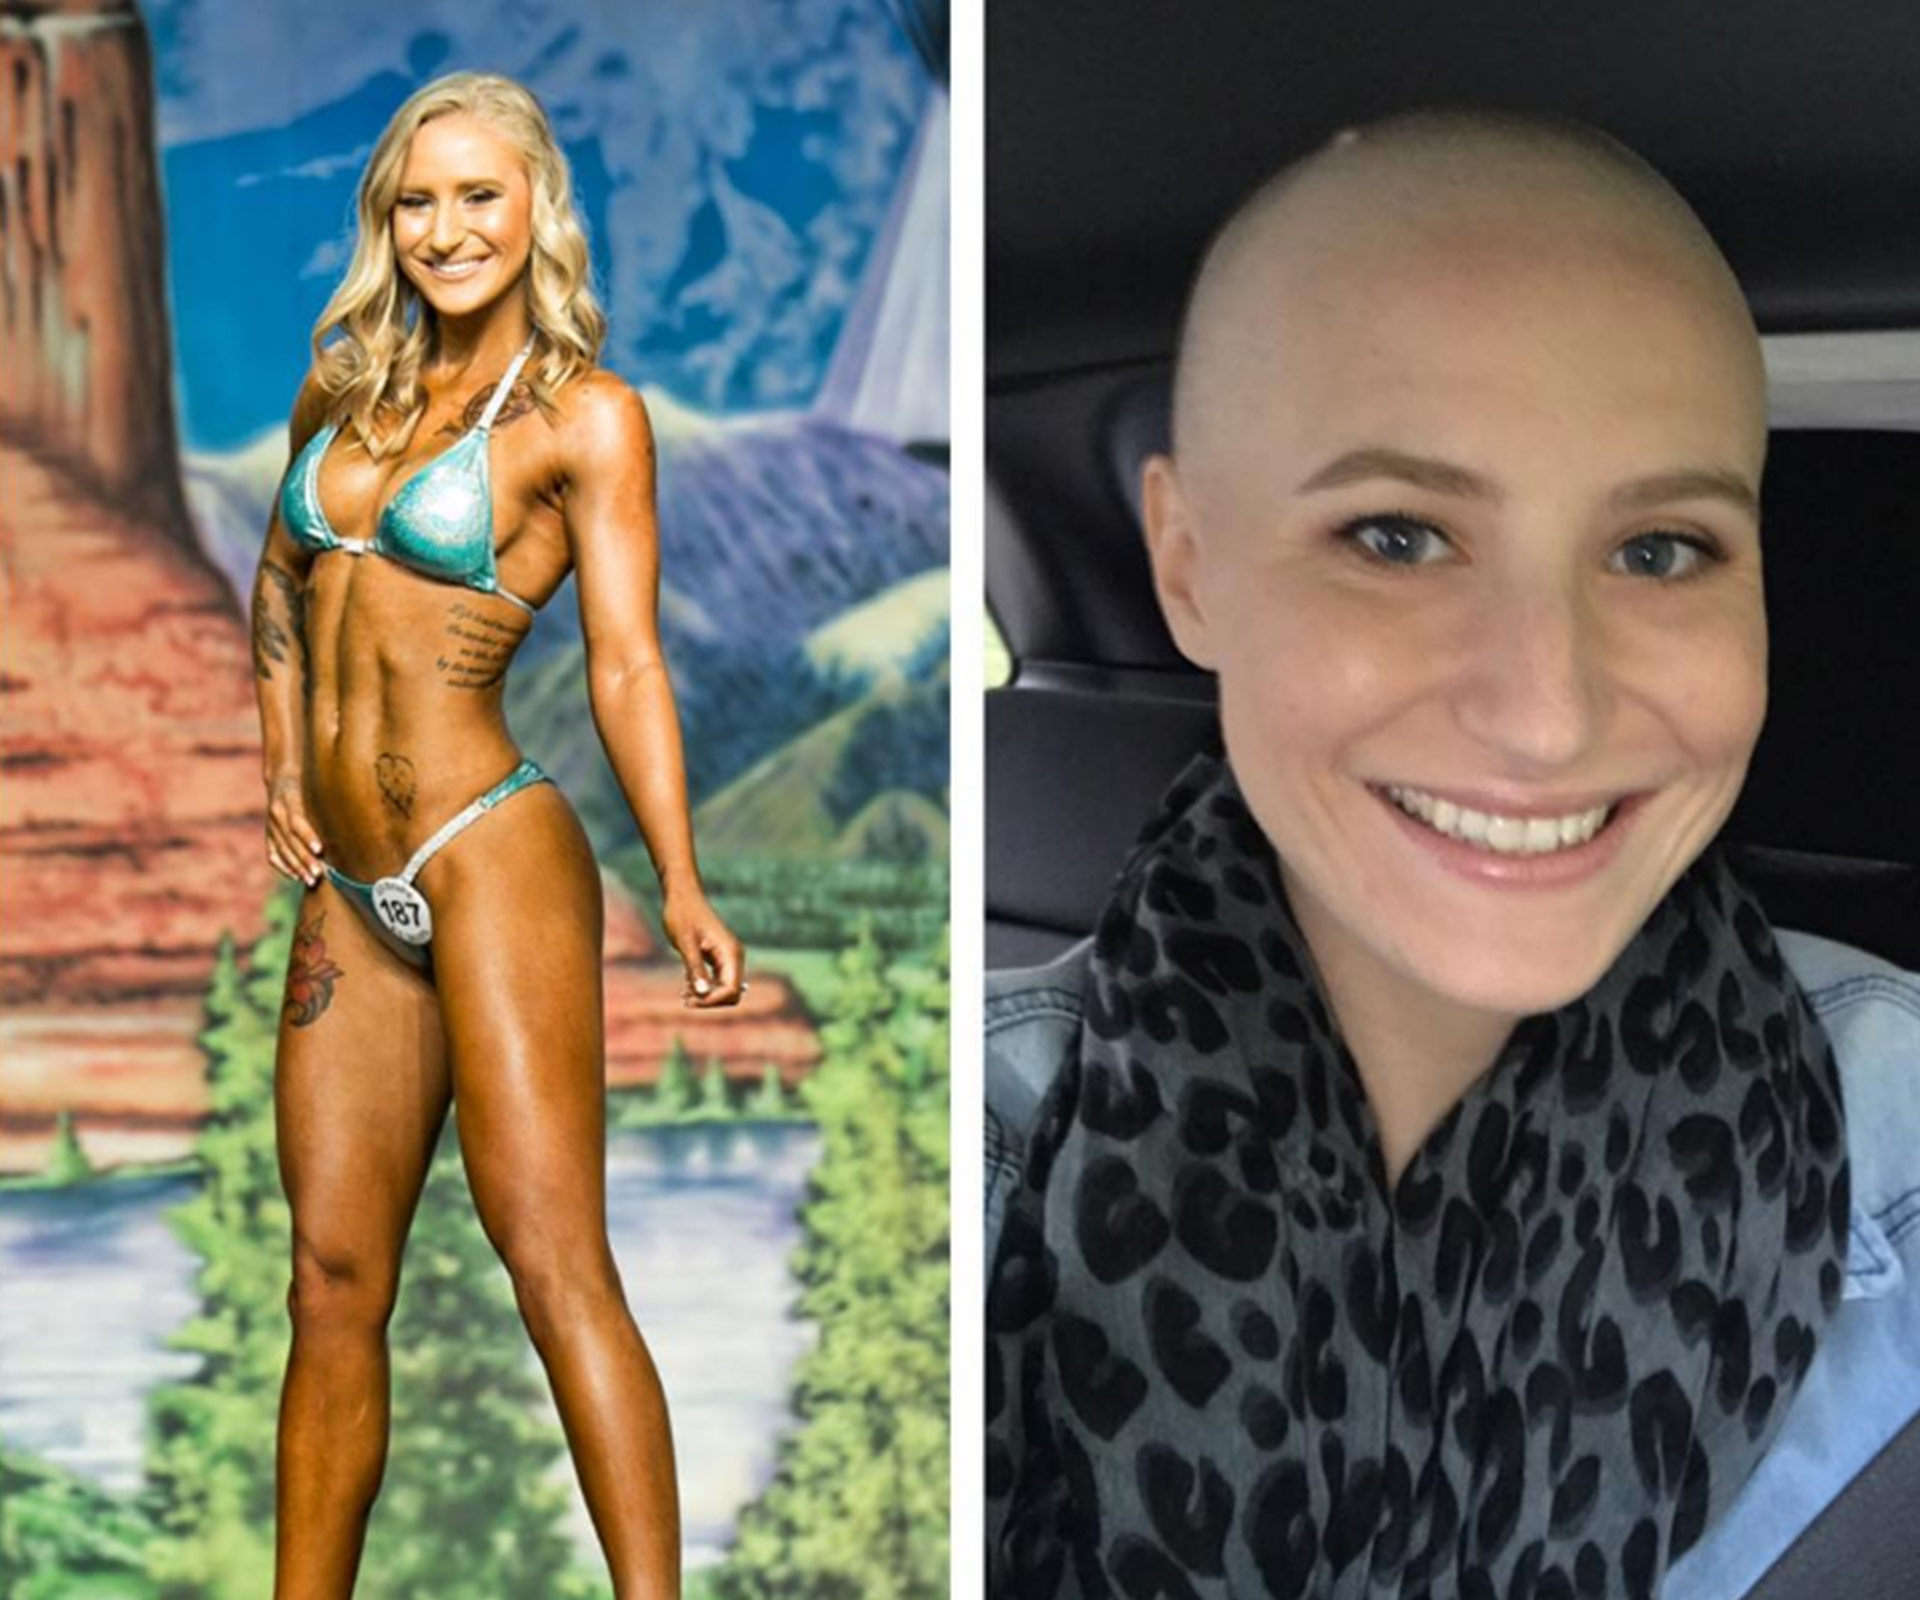 Bikini competitor on how her ovarian cancer journey has changed her body